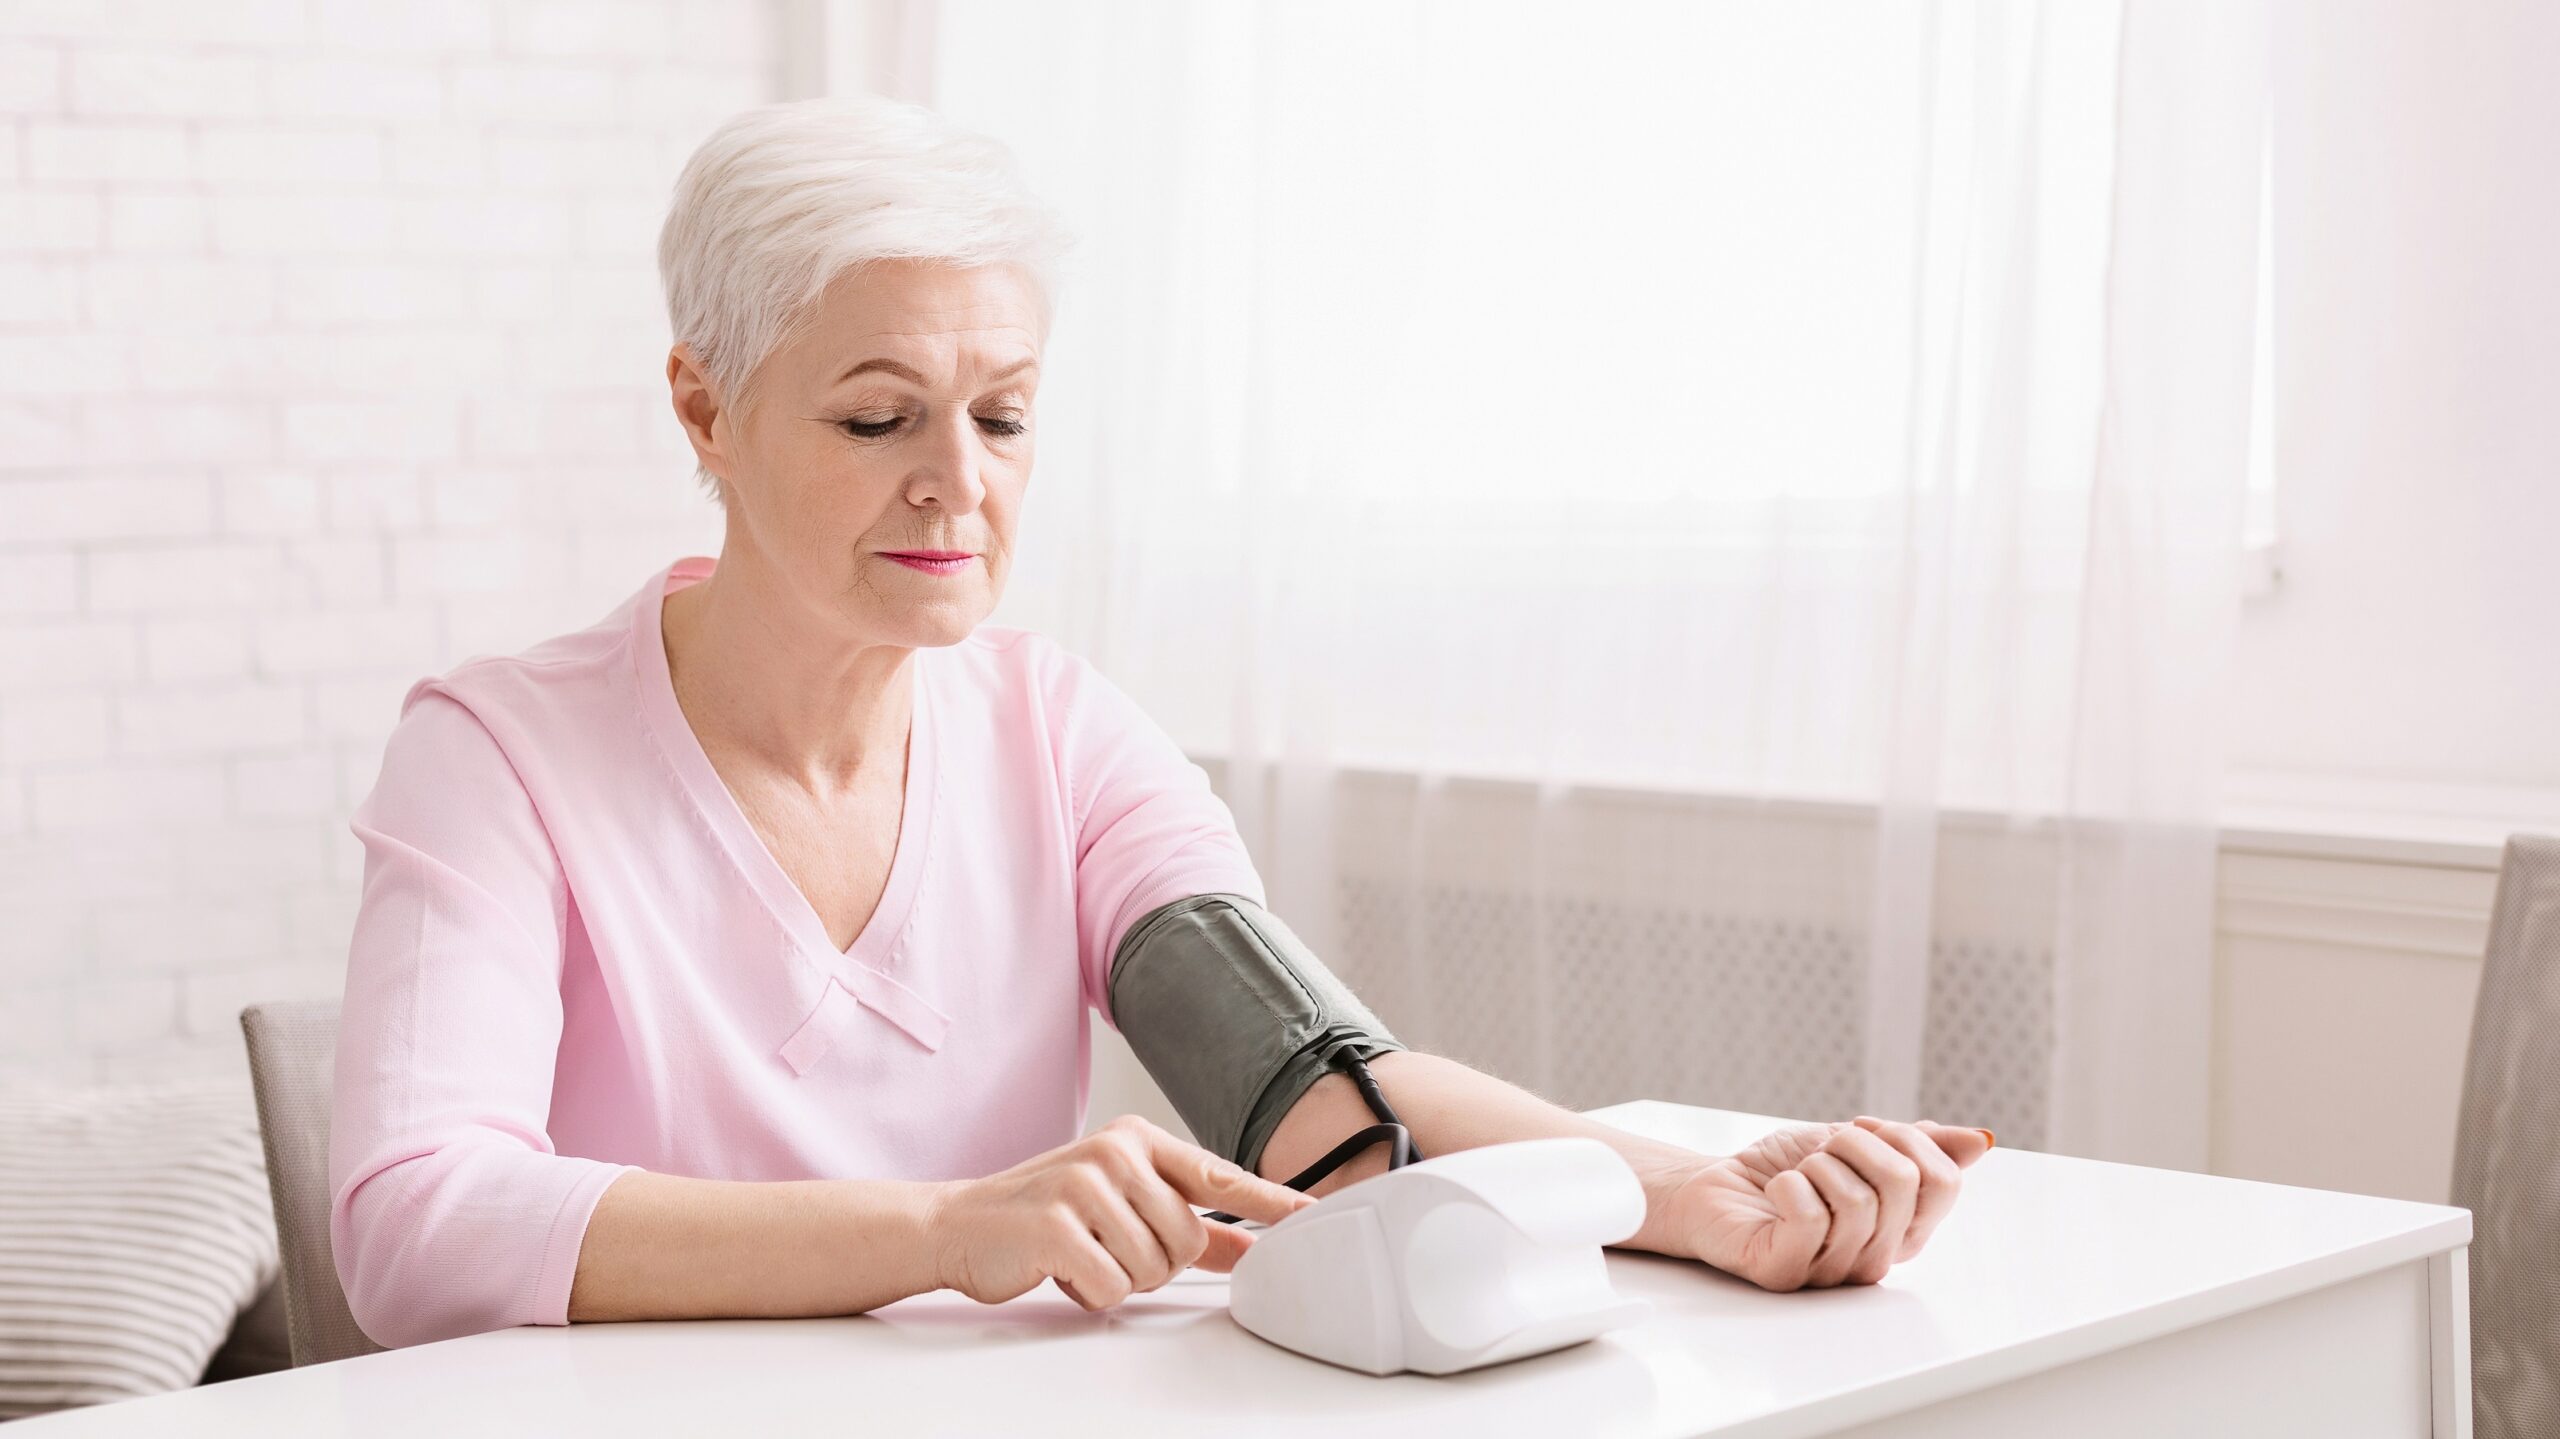 Blood pressure: With these values, women live the longest on average